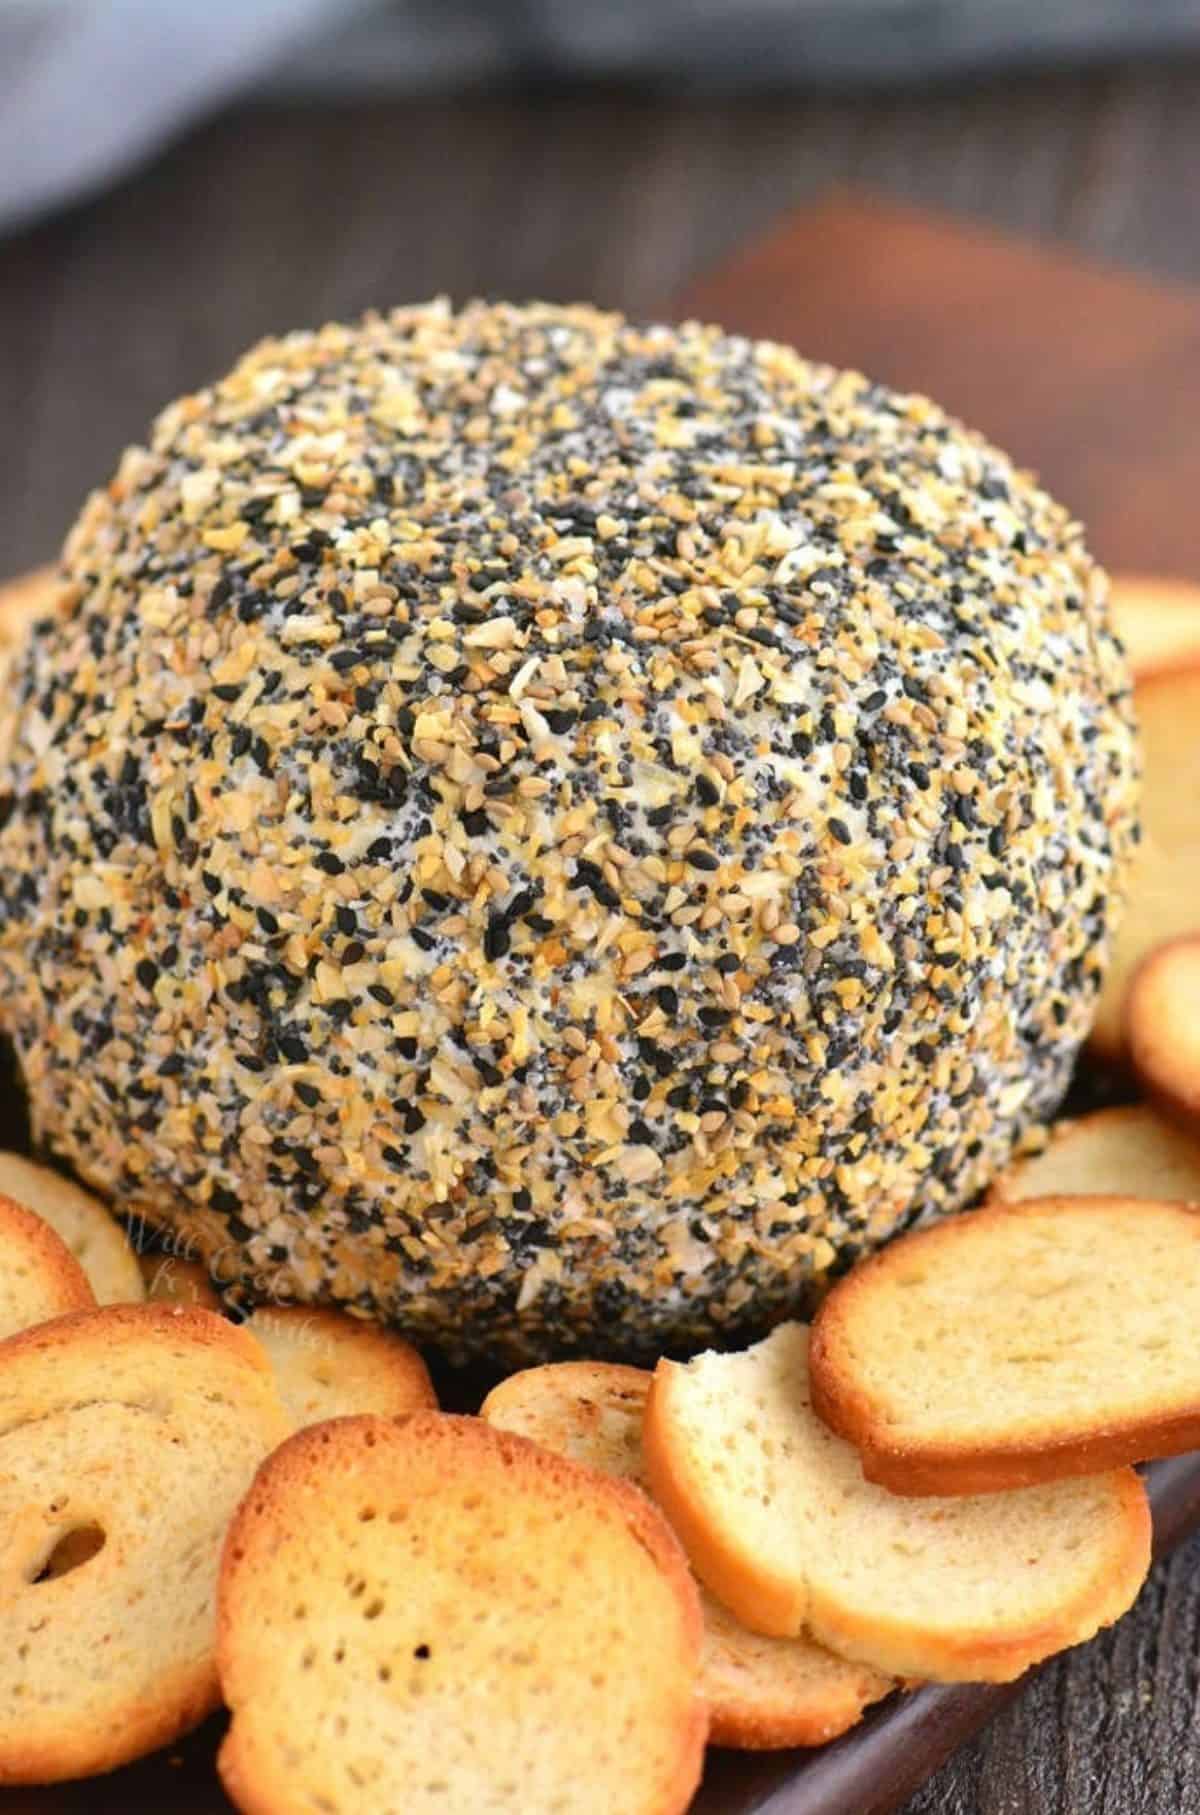 big round cheese ball coated in everything bagel seasoning with bread.